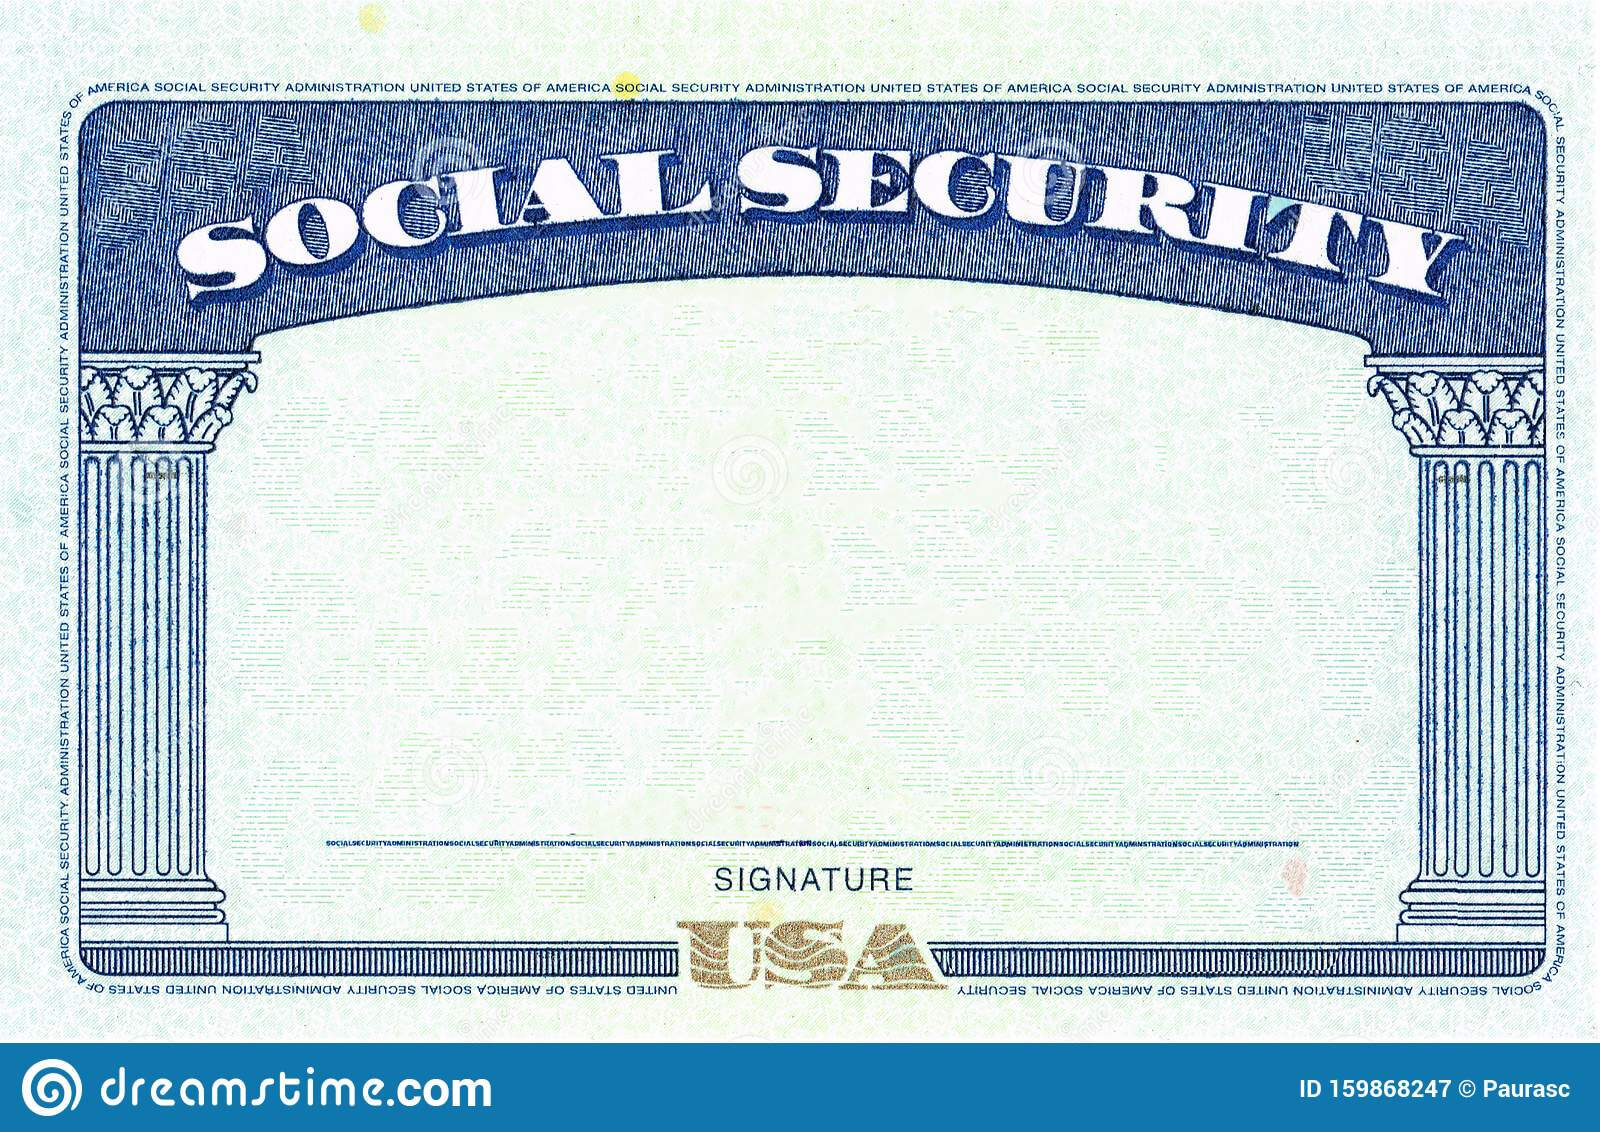 Social Security Card Blank Stock Image. Image Of Emigration Regarding Blank Social Security Card Template